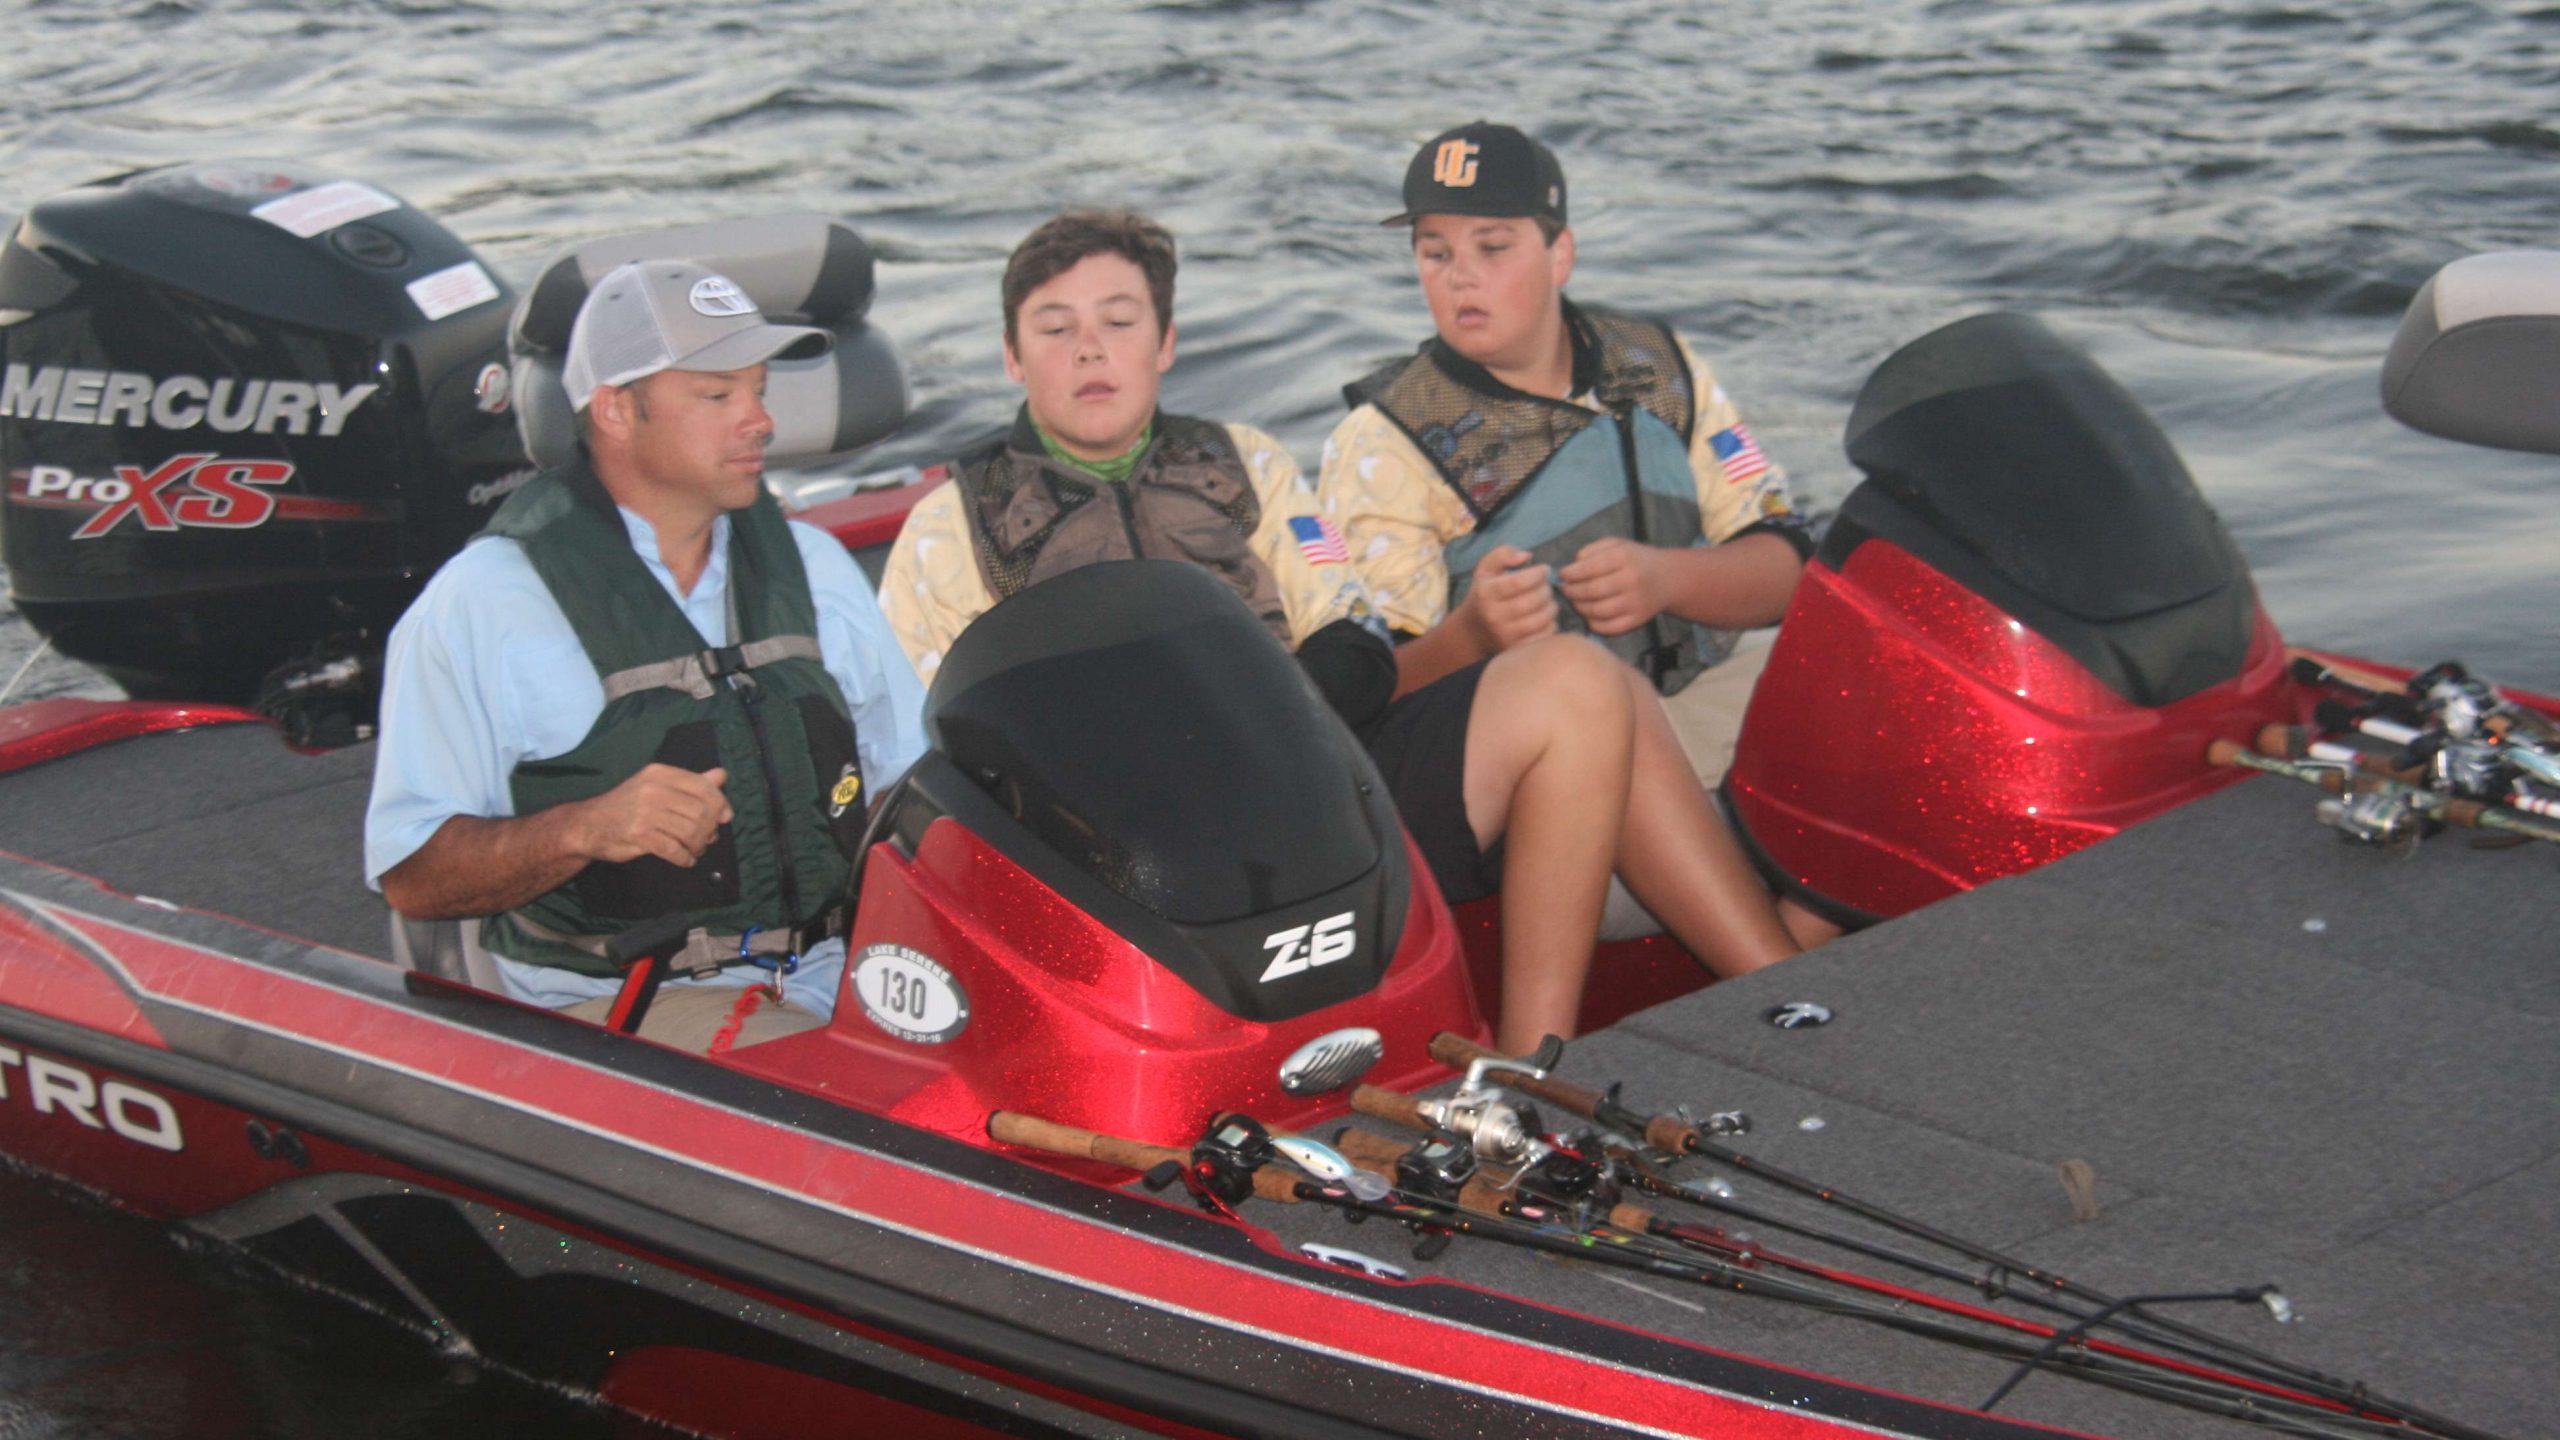 Mississippi anglers Jacob Boyer and John Paul Allen and their coach catch their number and float by.